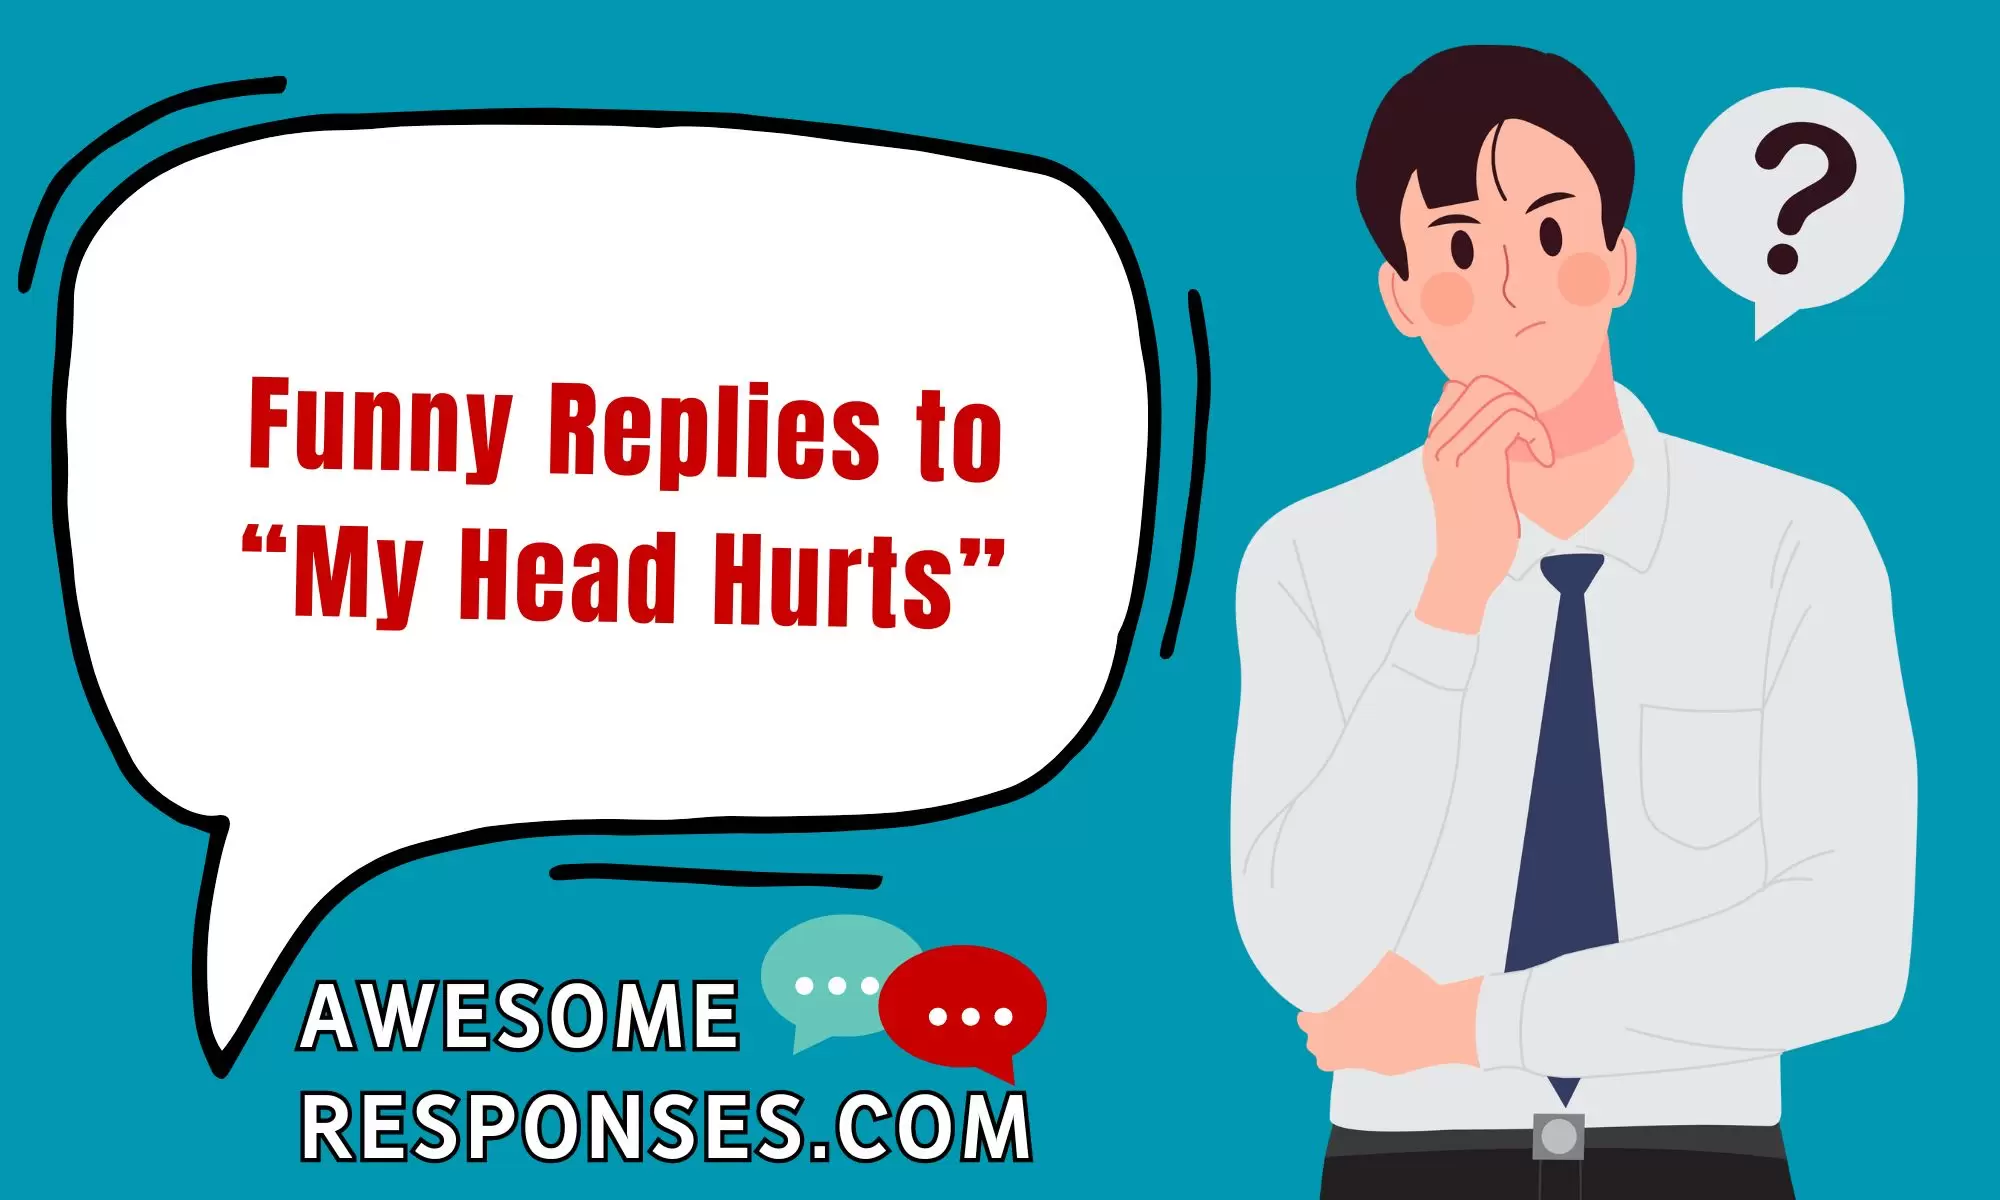 Funny Replies to “My Head Hurts”